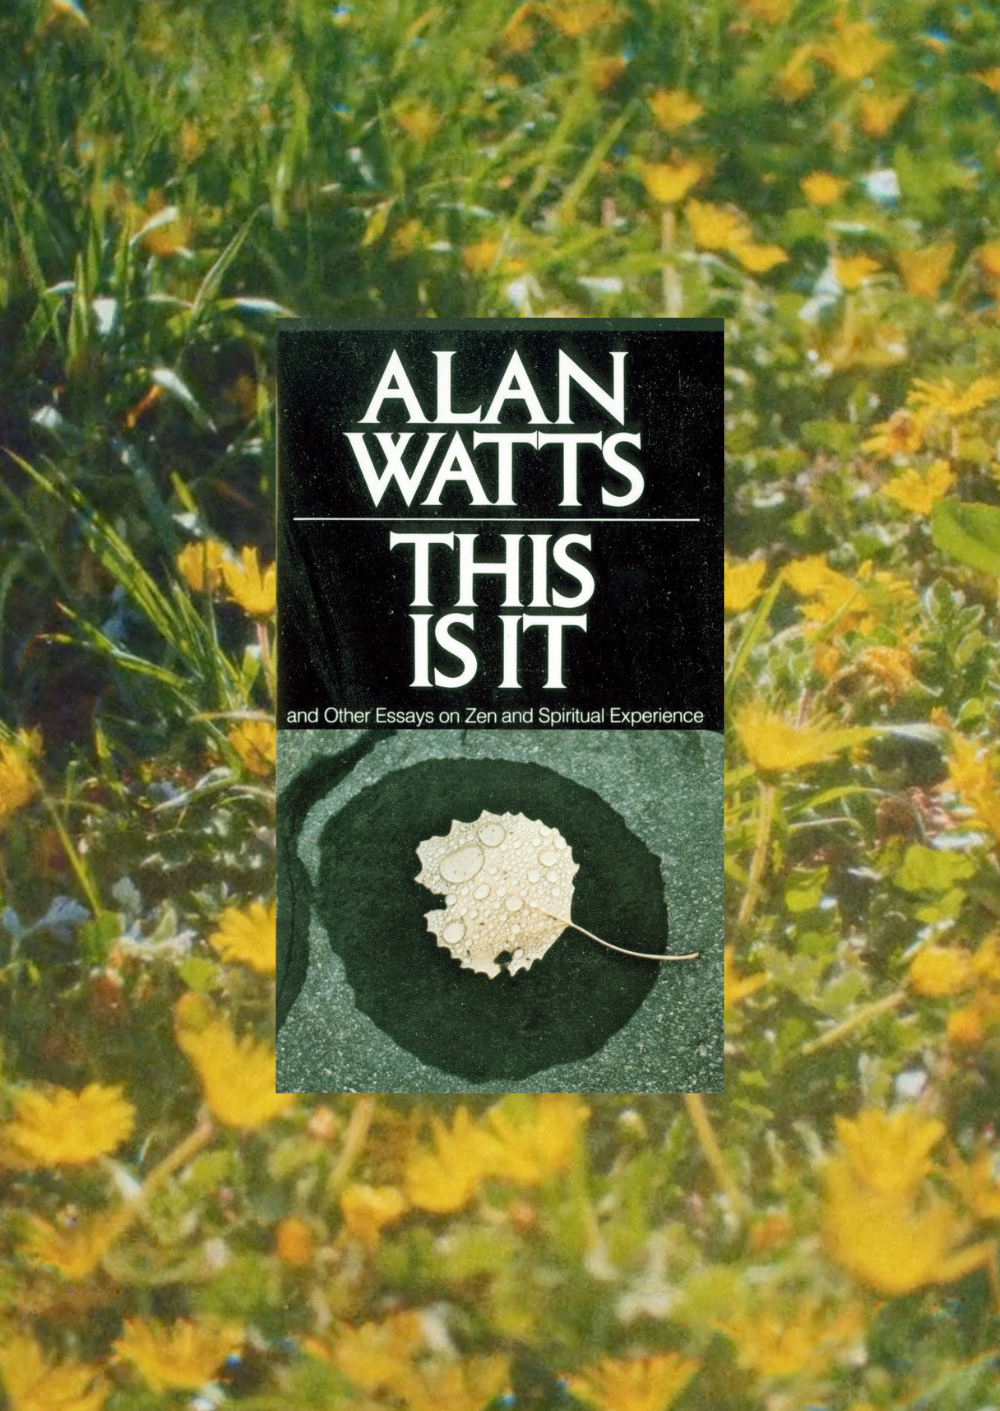 Alan Watts - This is it